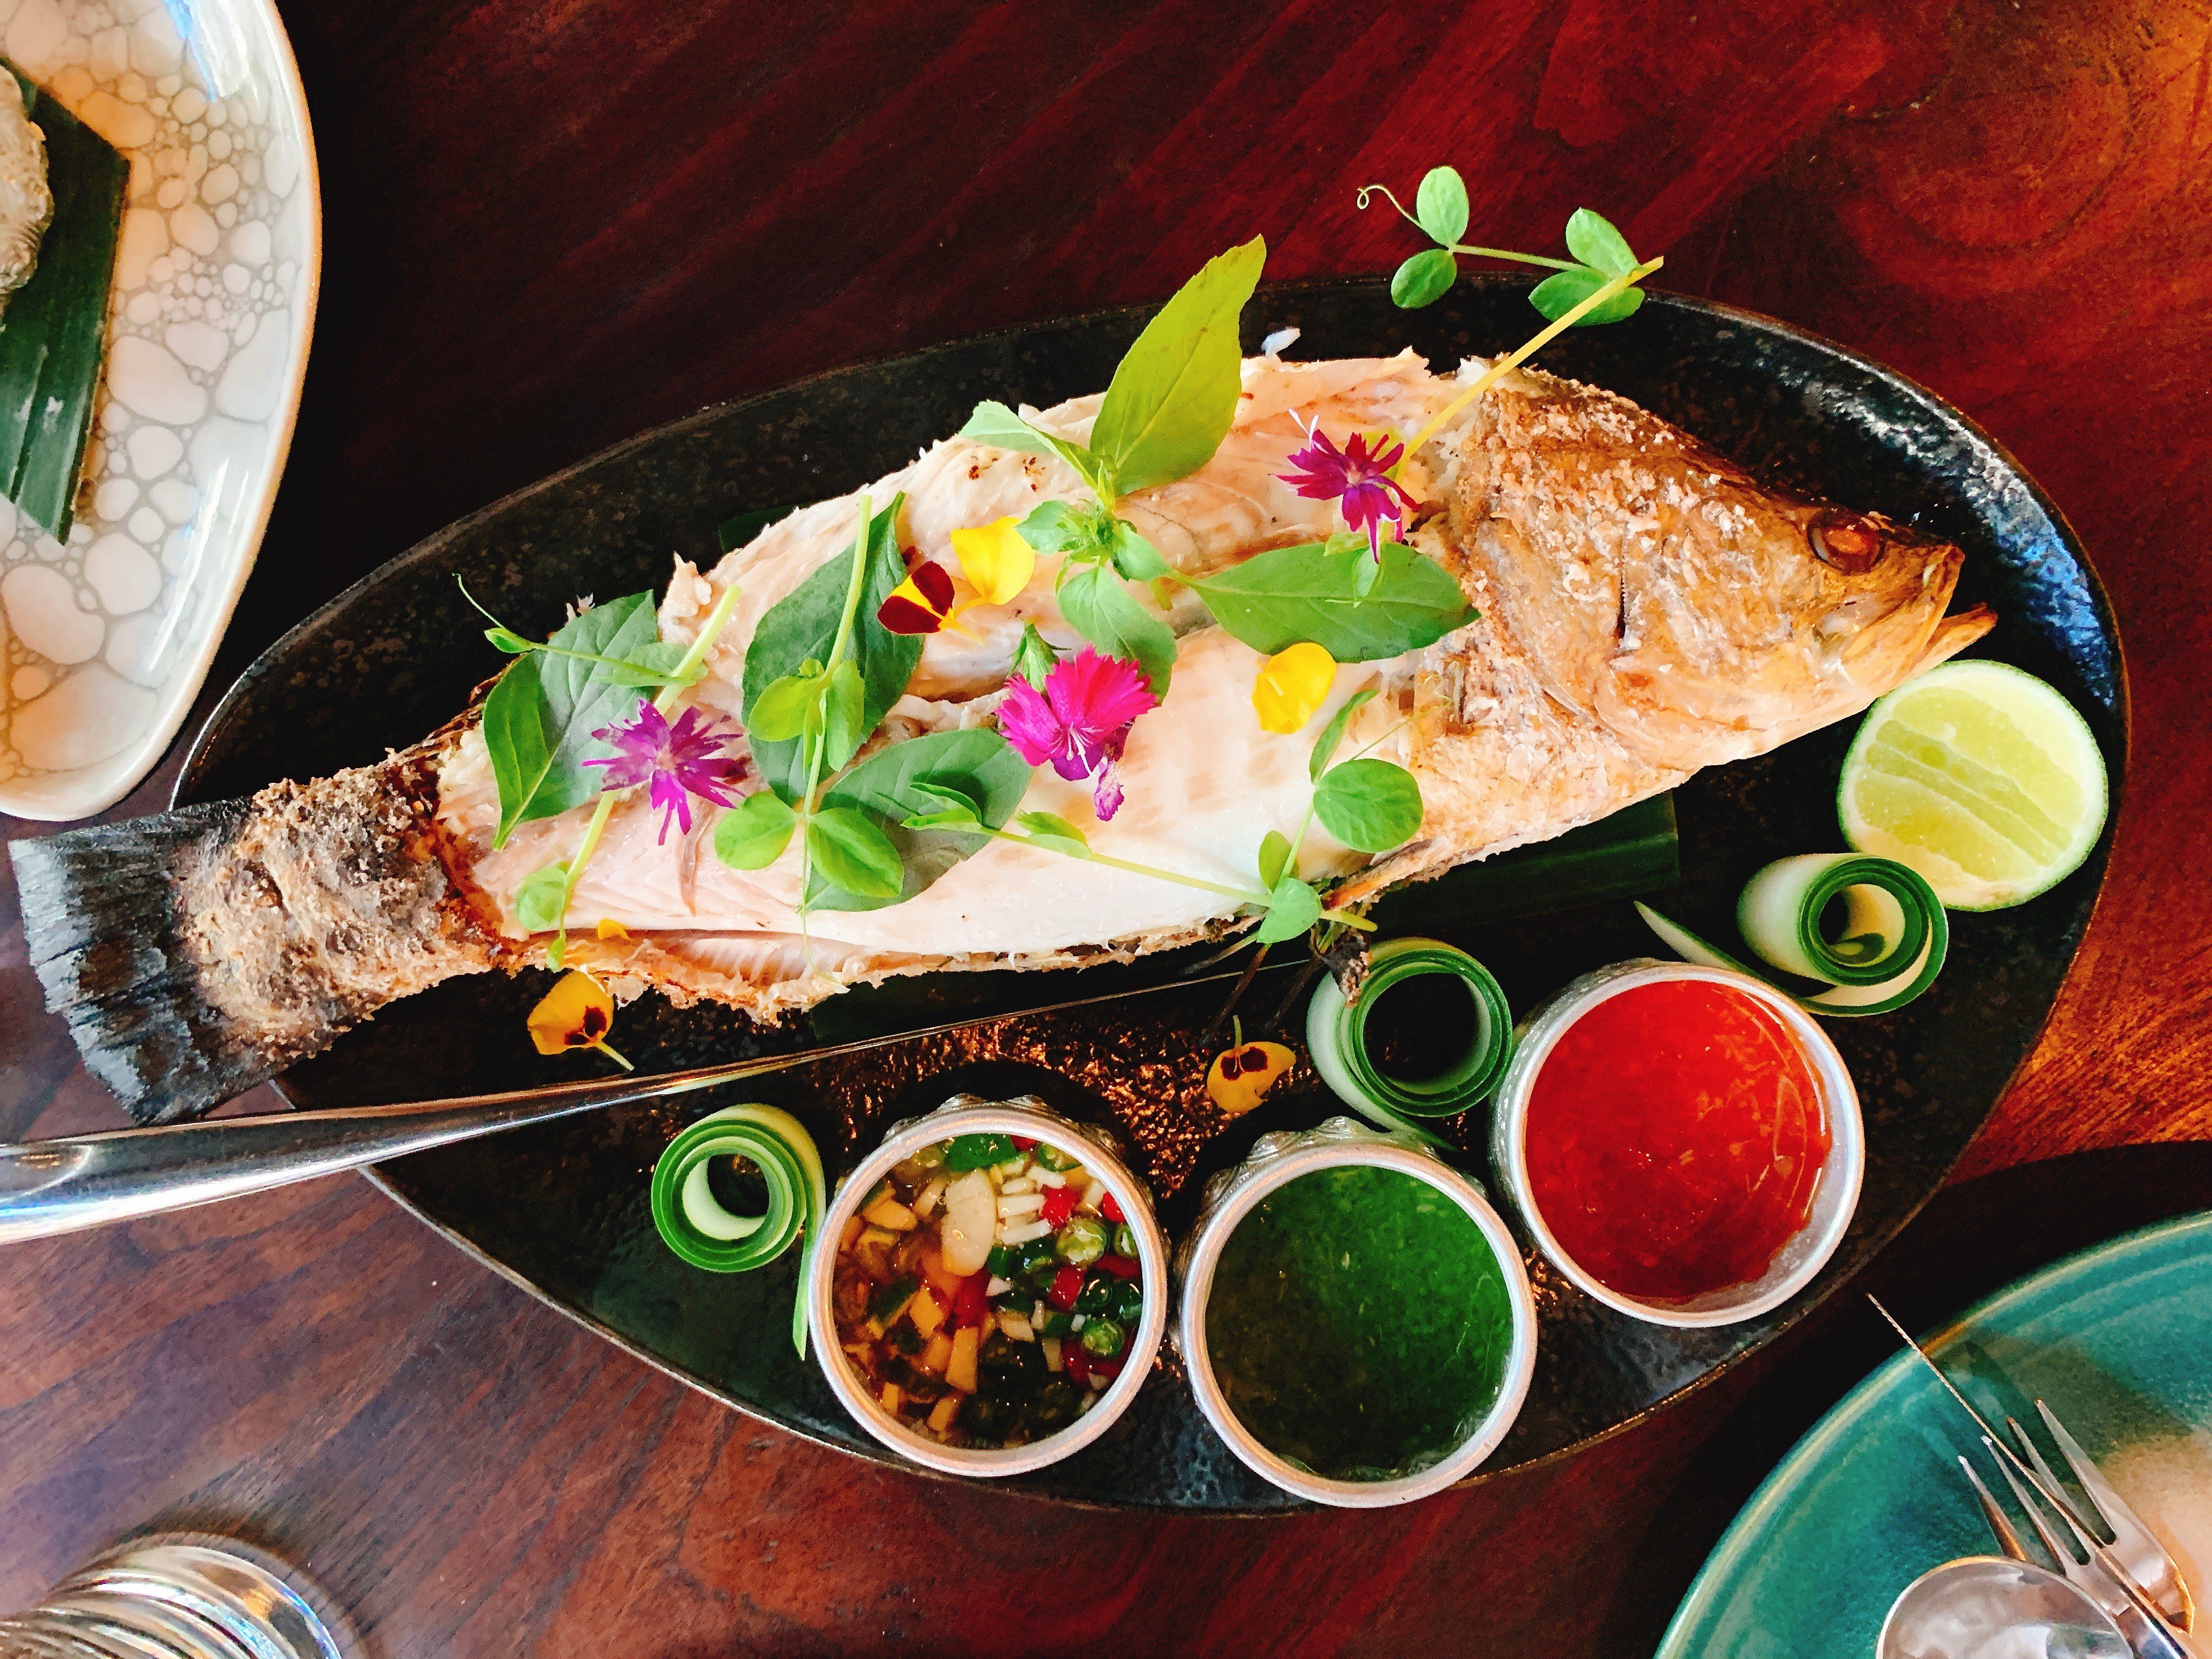 Bali is awash with vibrant, sophisticated restaurants that offer an array of Balinese, pan-Asian and European fusion cuisines. Photo: Jason Y Ng